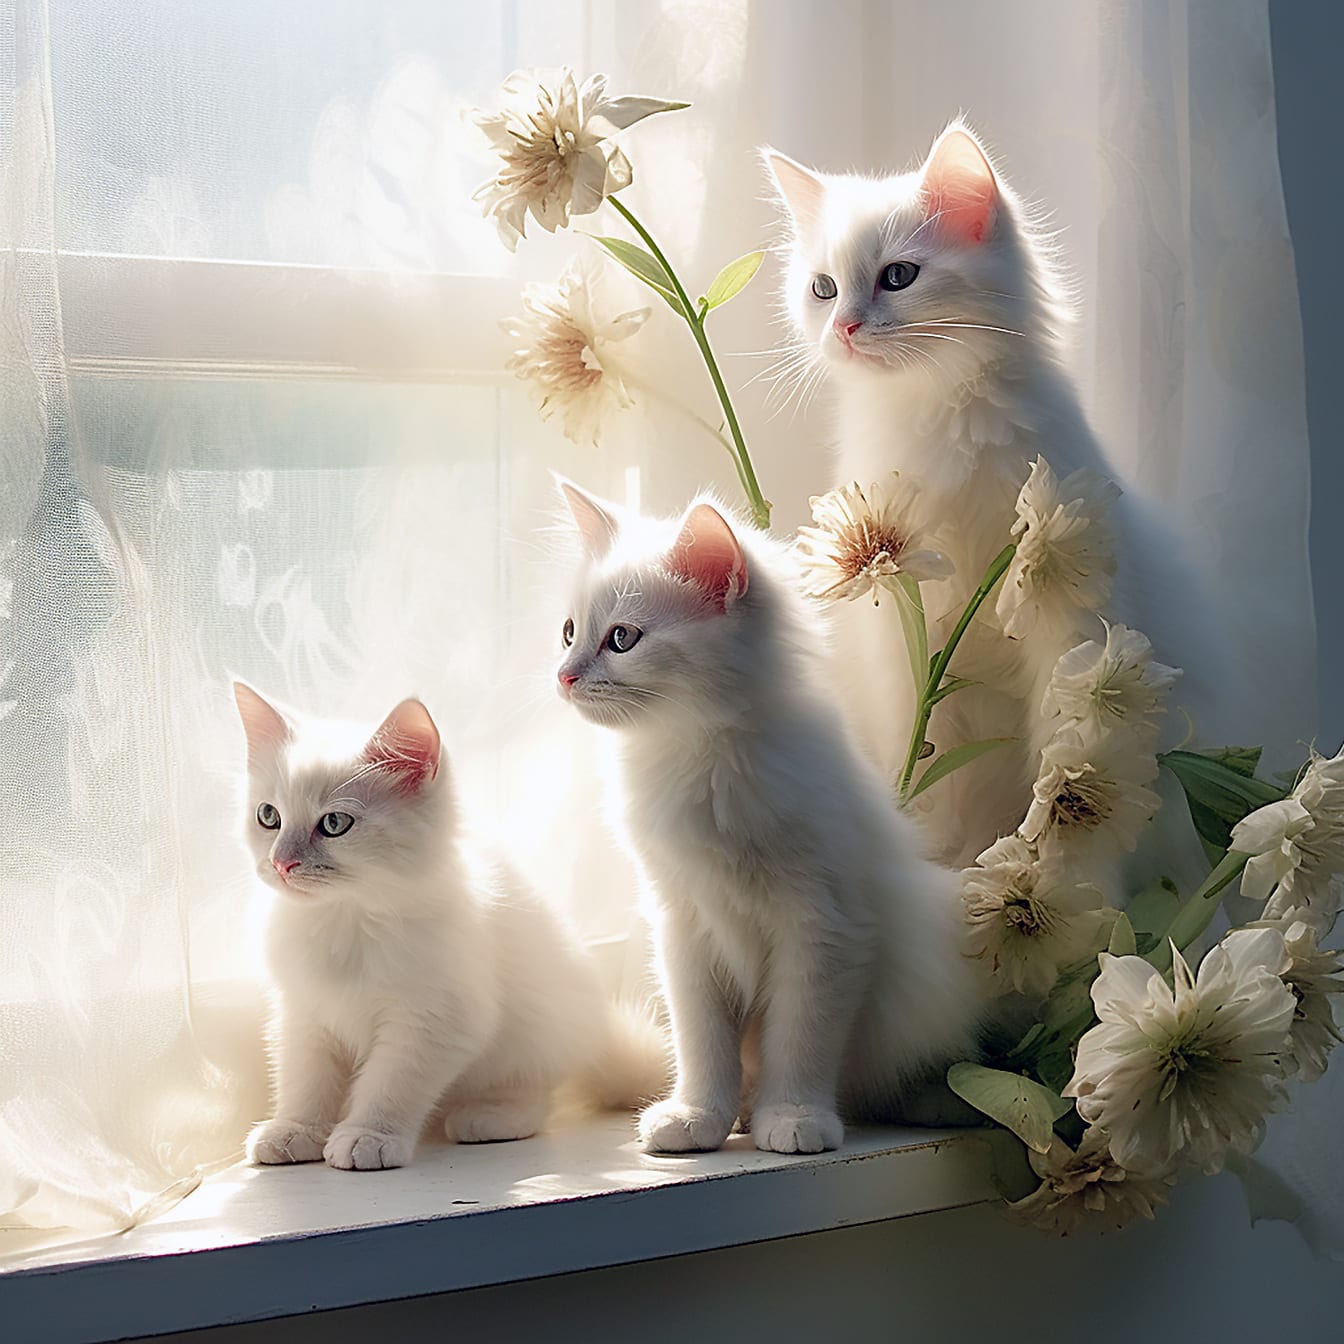 Three adorable kittens sitting by white flowers on window digital illustration